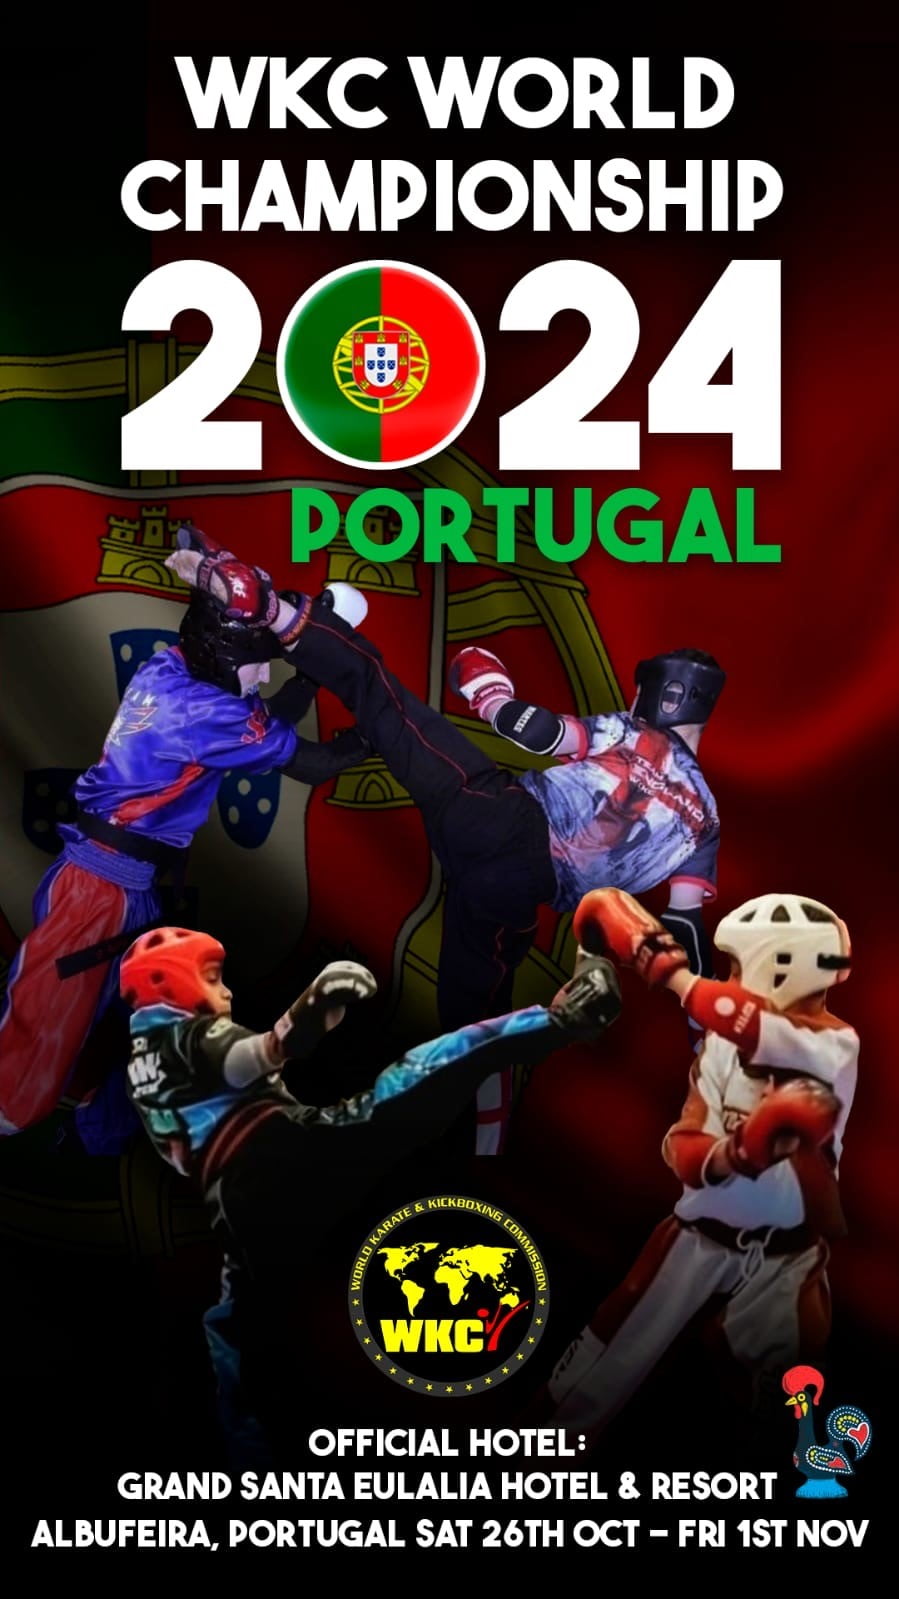 WKC World Championships 2024 in Portugal poster